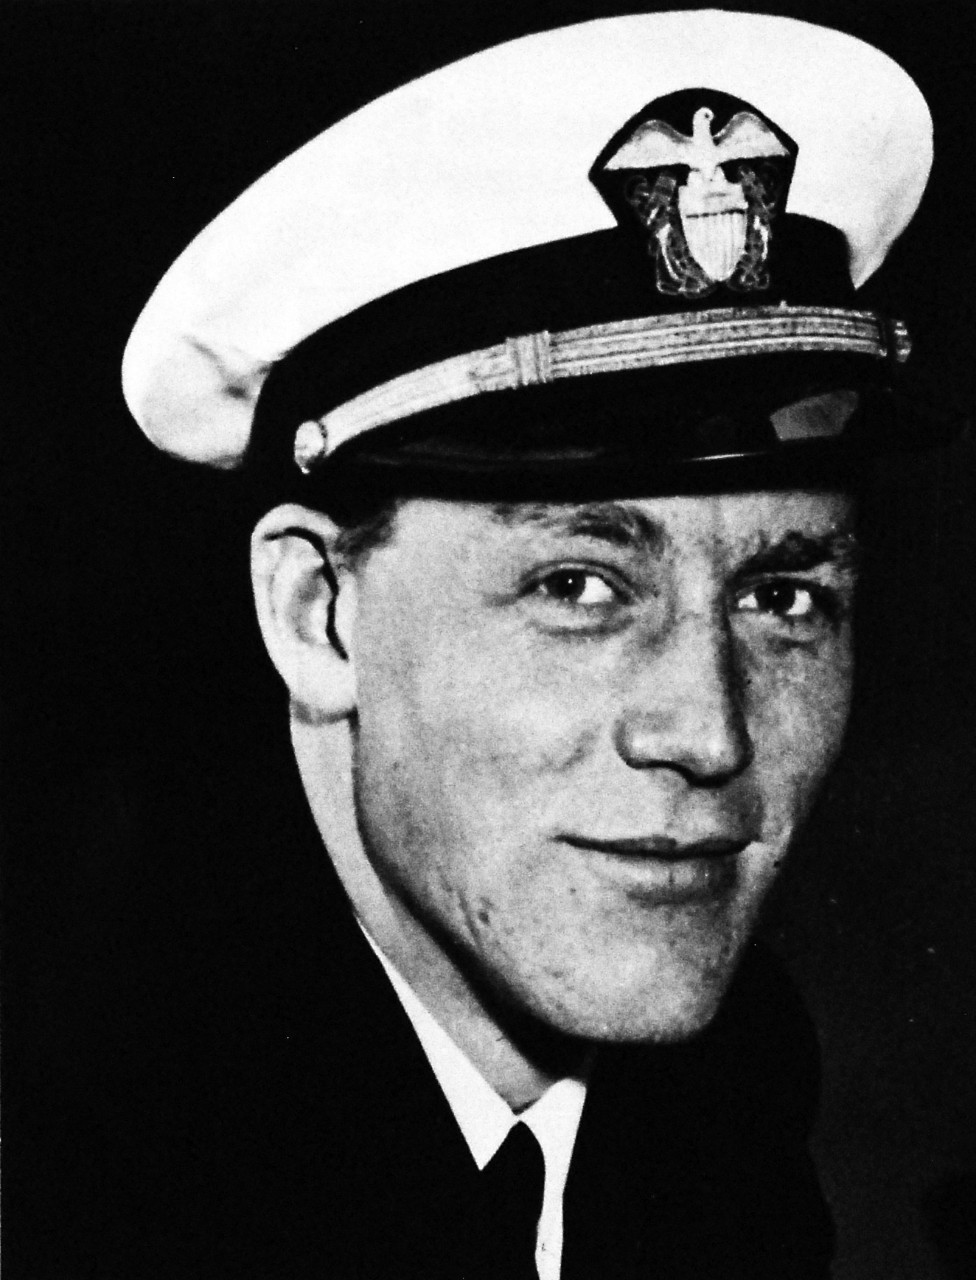 80-G-43403: Battle of Kula Gulf, July 5-6, 1943.   Lieutenant Commander Warren C. Boles, USNR, who, after USS Helena (CL-50) was sunk in the Battle of Kula Gulf, helped to inspire a group of more than 50 survivors and lead them to Vella Lavella Island from which they were rescued.   Received September 20, 1943.    U.S. Navy photograph, now in the collections of the National Archives.  (2017/02/28).